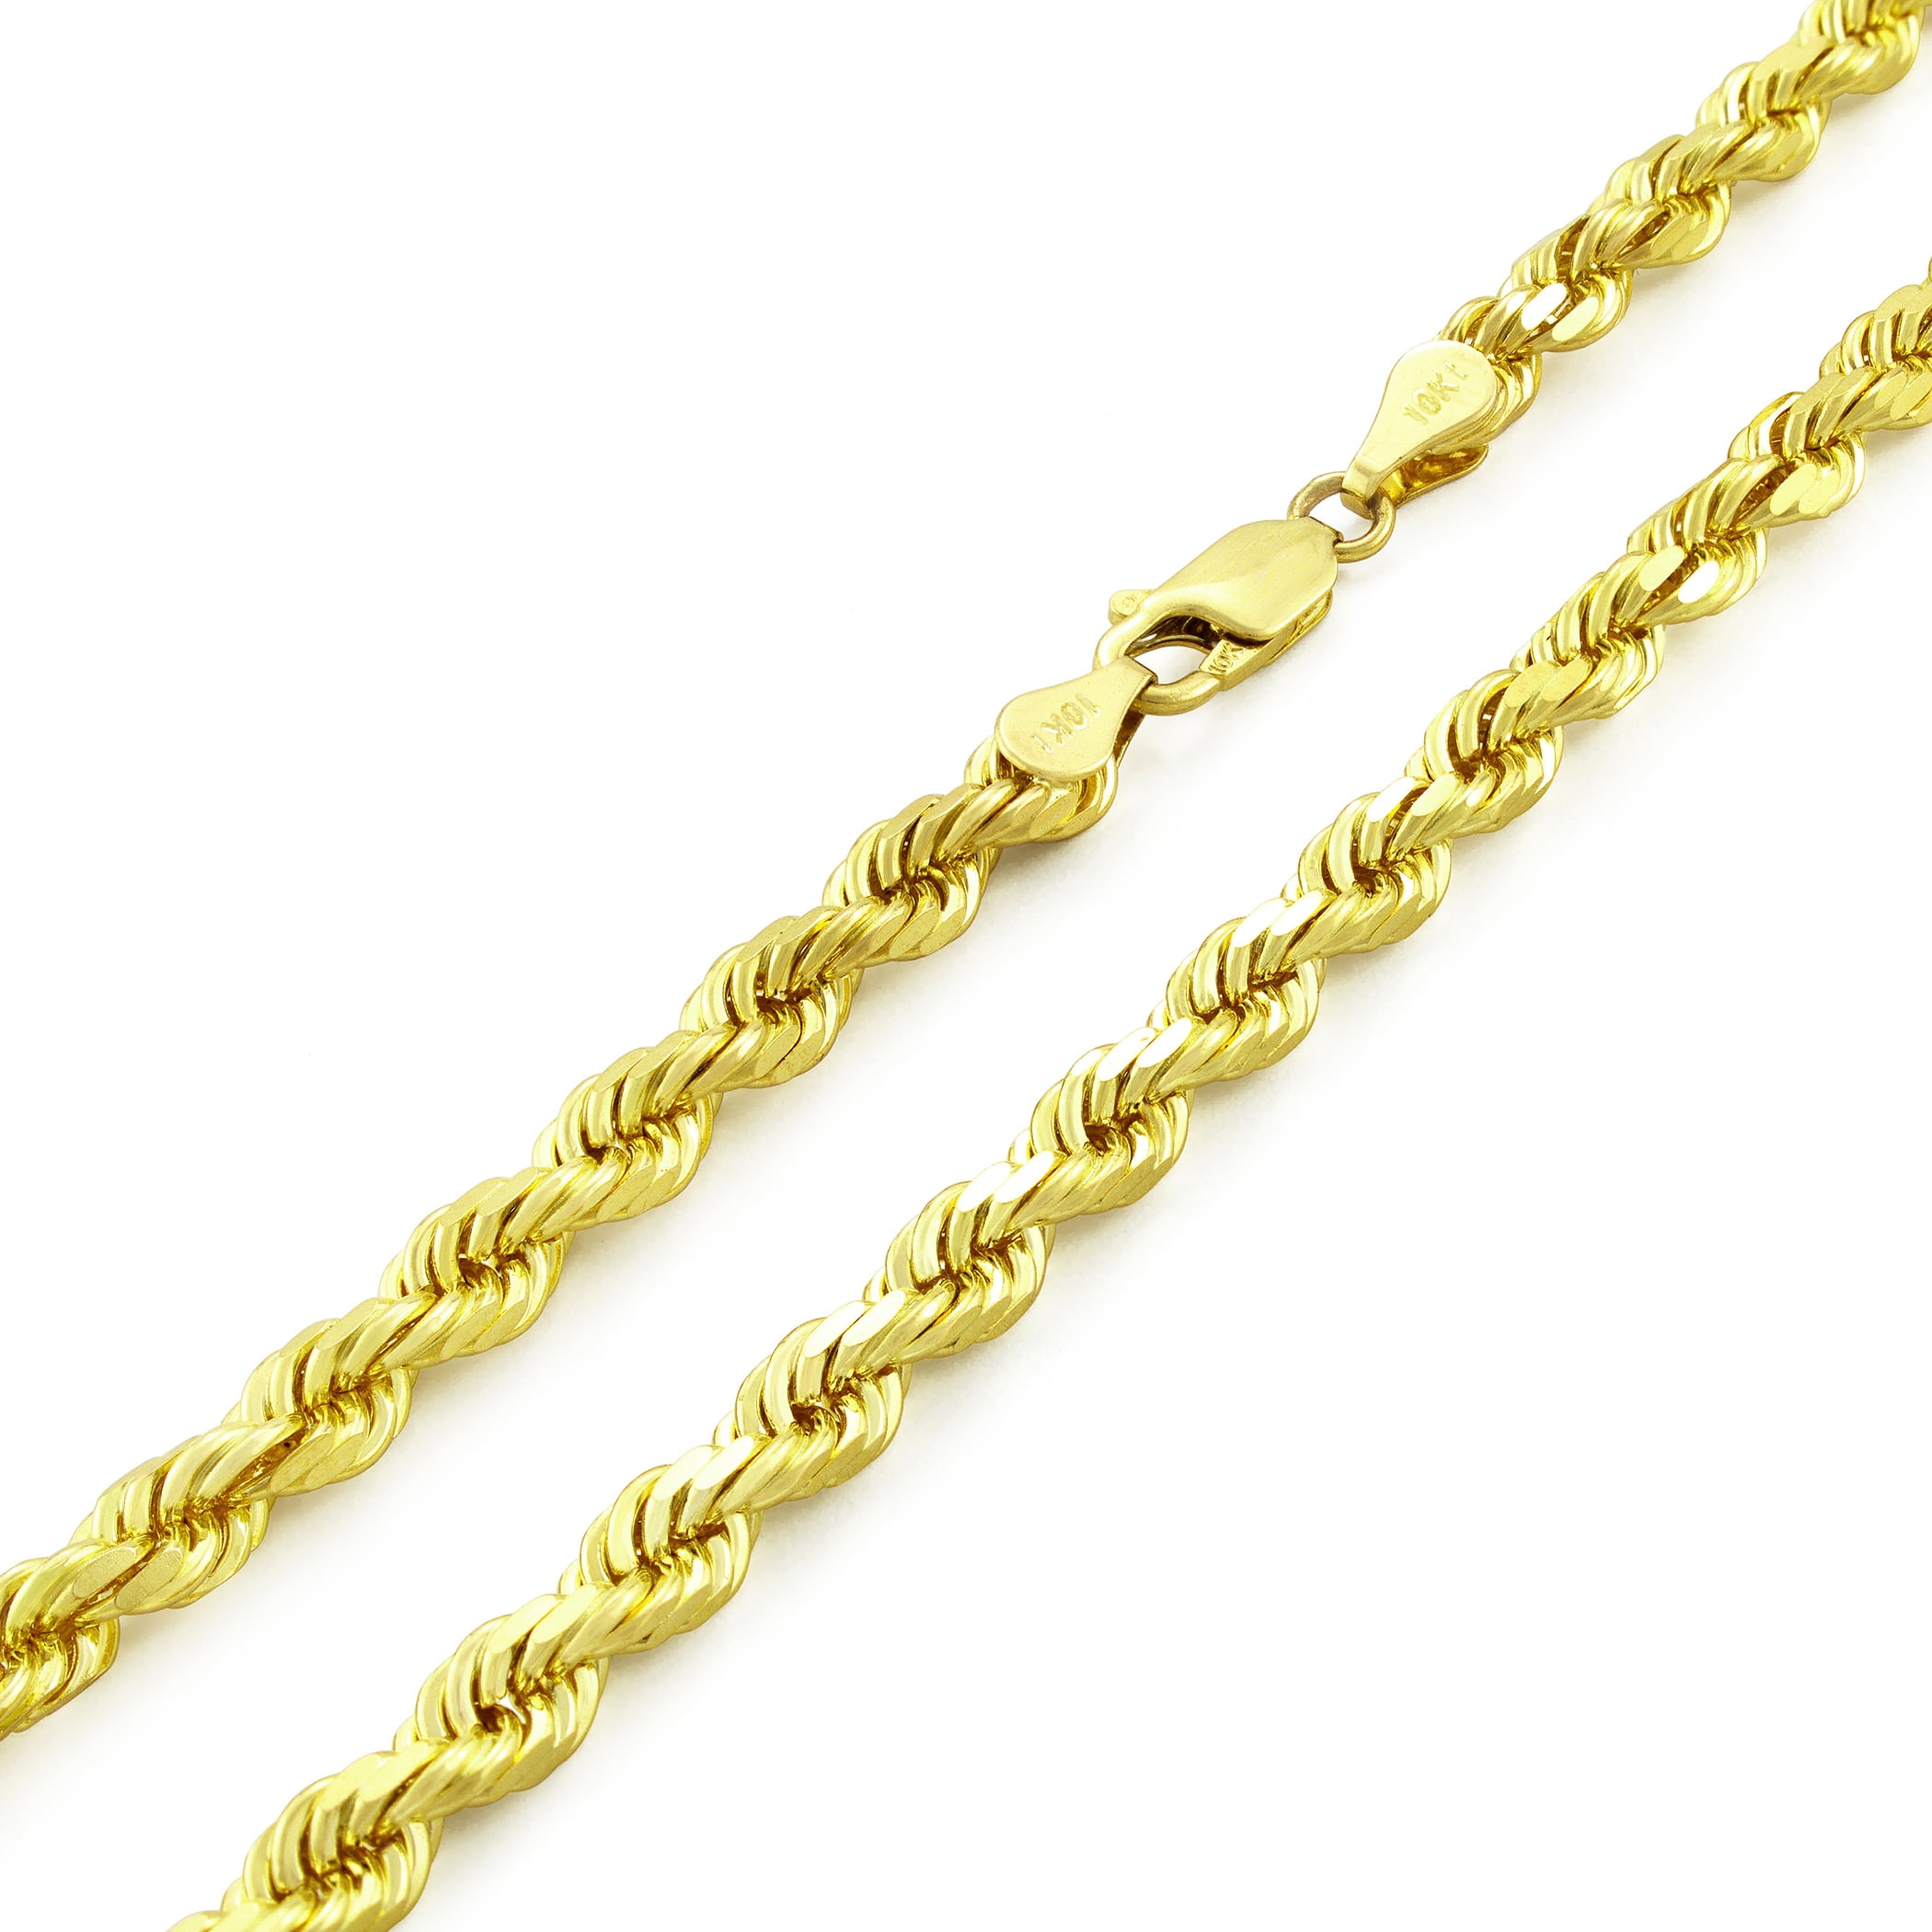 Gold Chain Rope Necklace Yellow 16-30 Solid 14k 4mm Men Women Diamond Cut Rope 